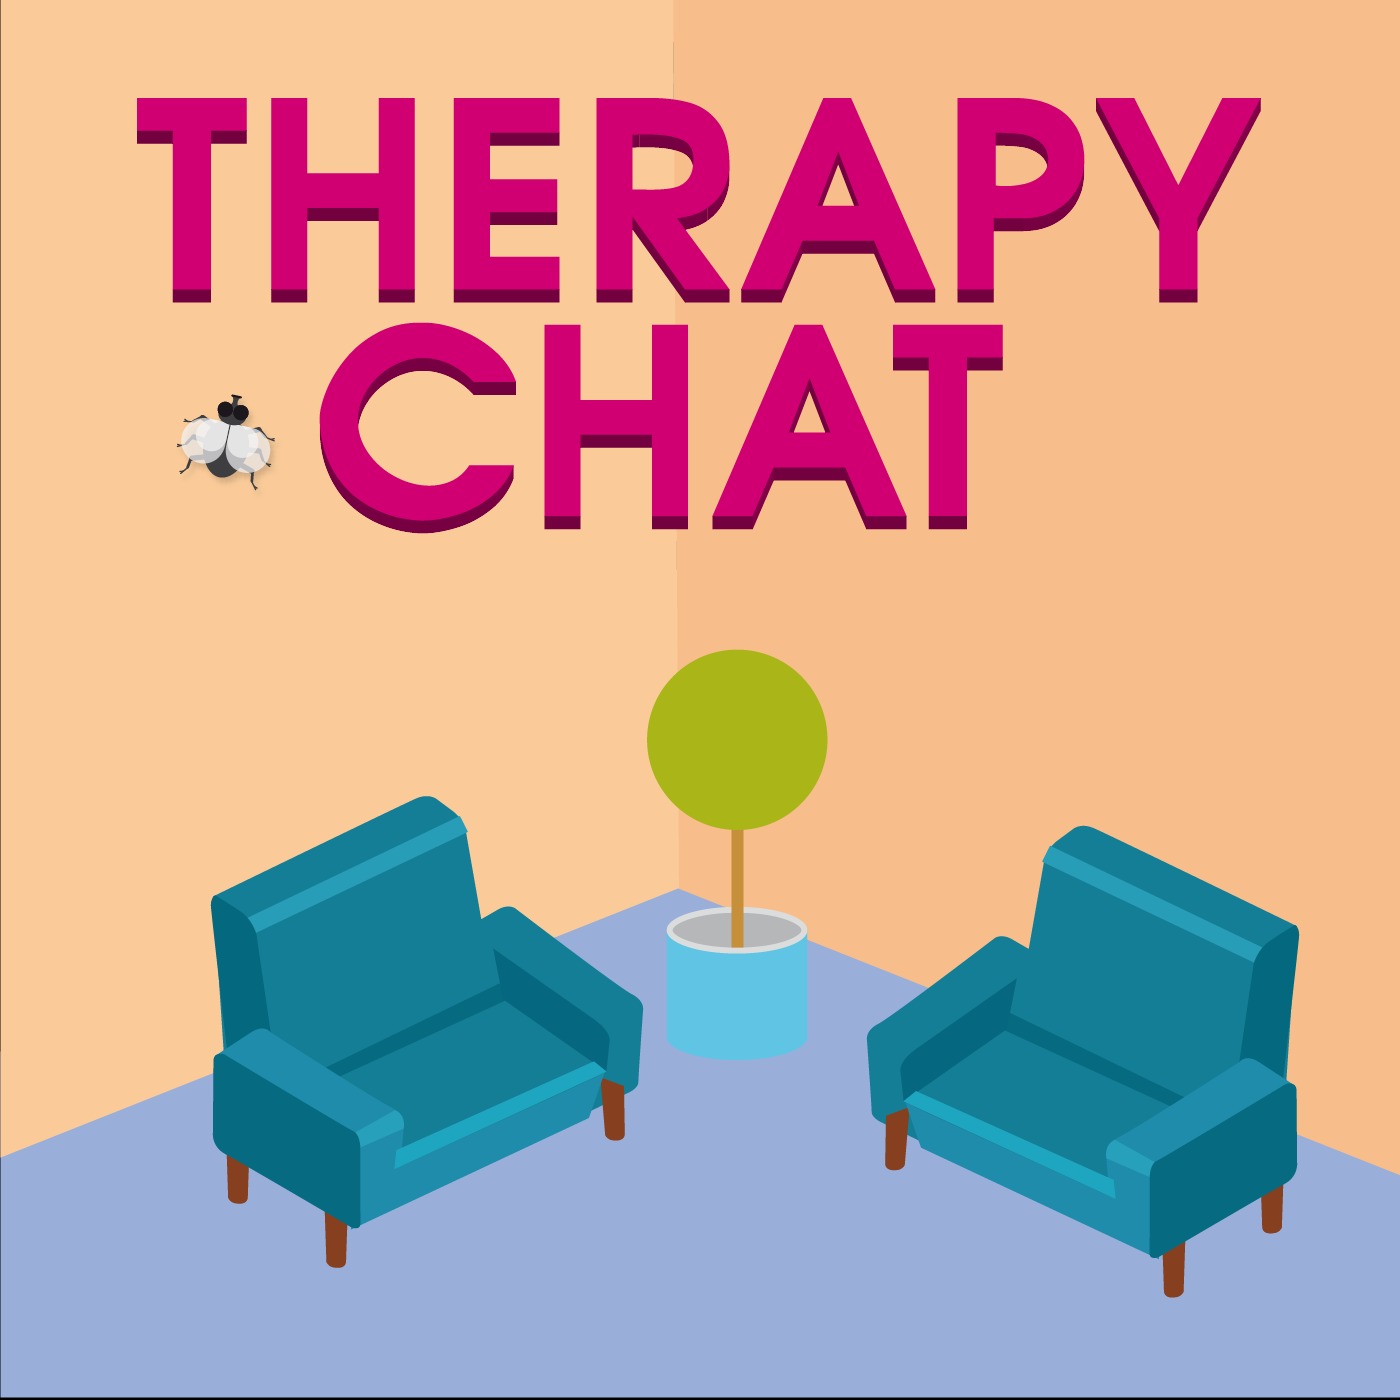 8: What Is An Integrative Psychotherapy Practice?